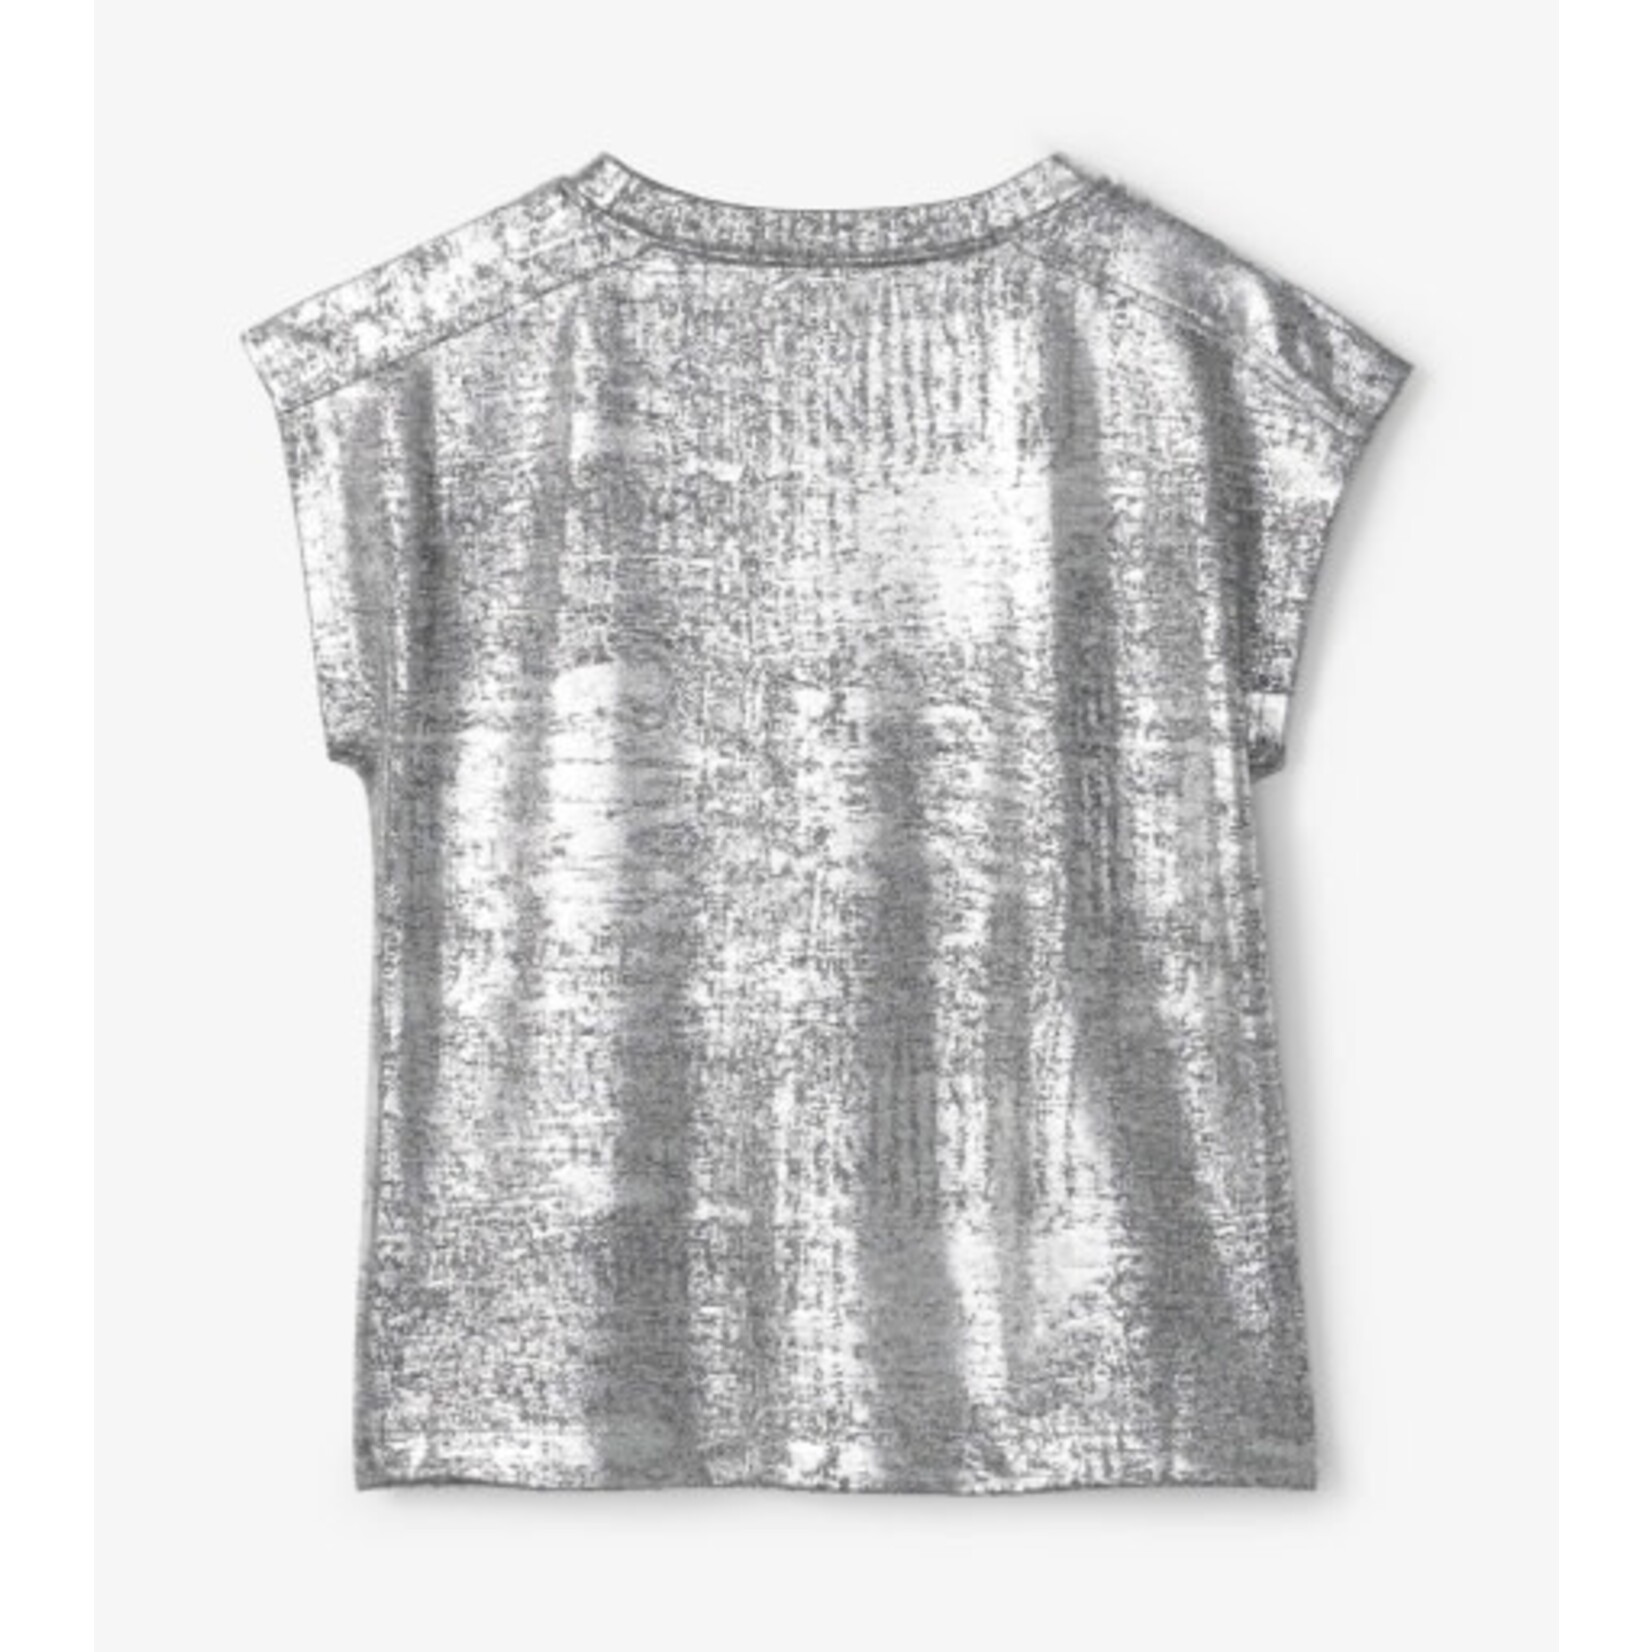 Hatley Kids silver shimmer relaxed tee